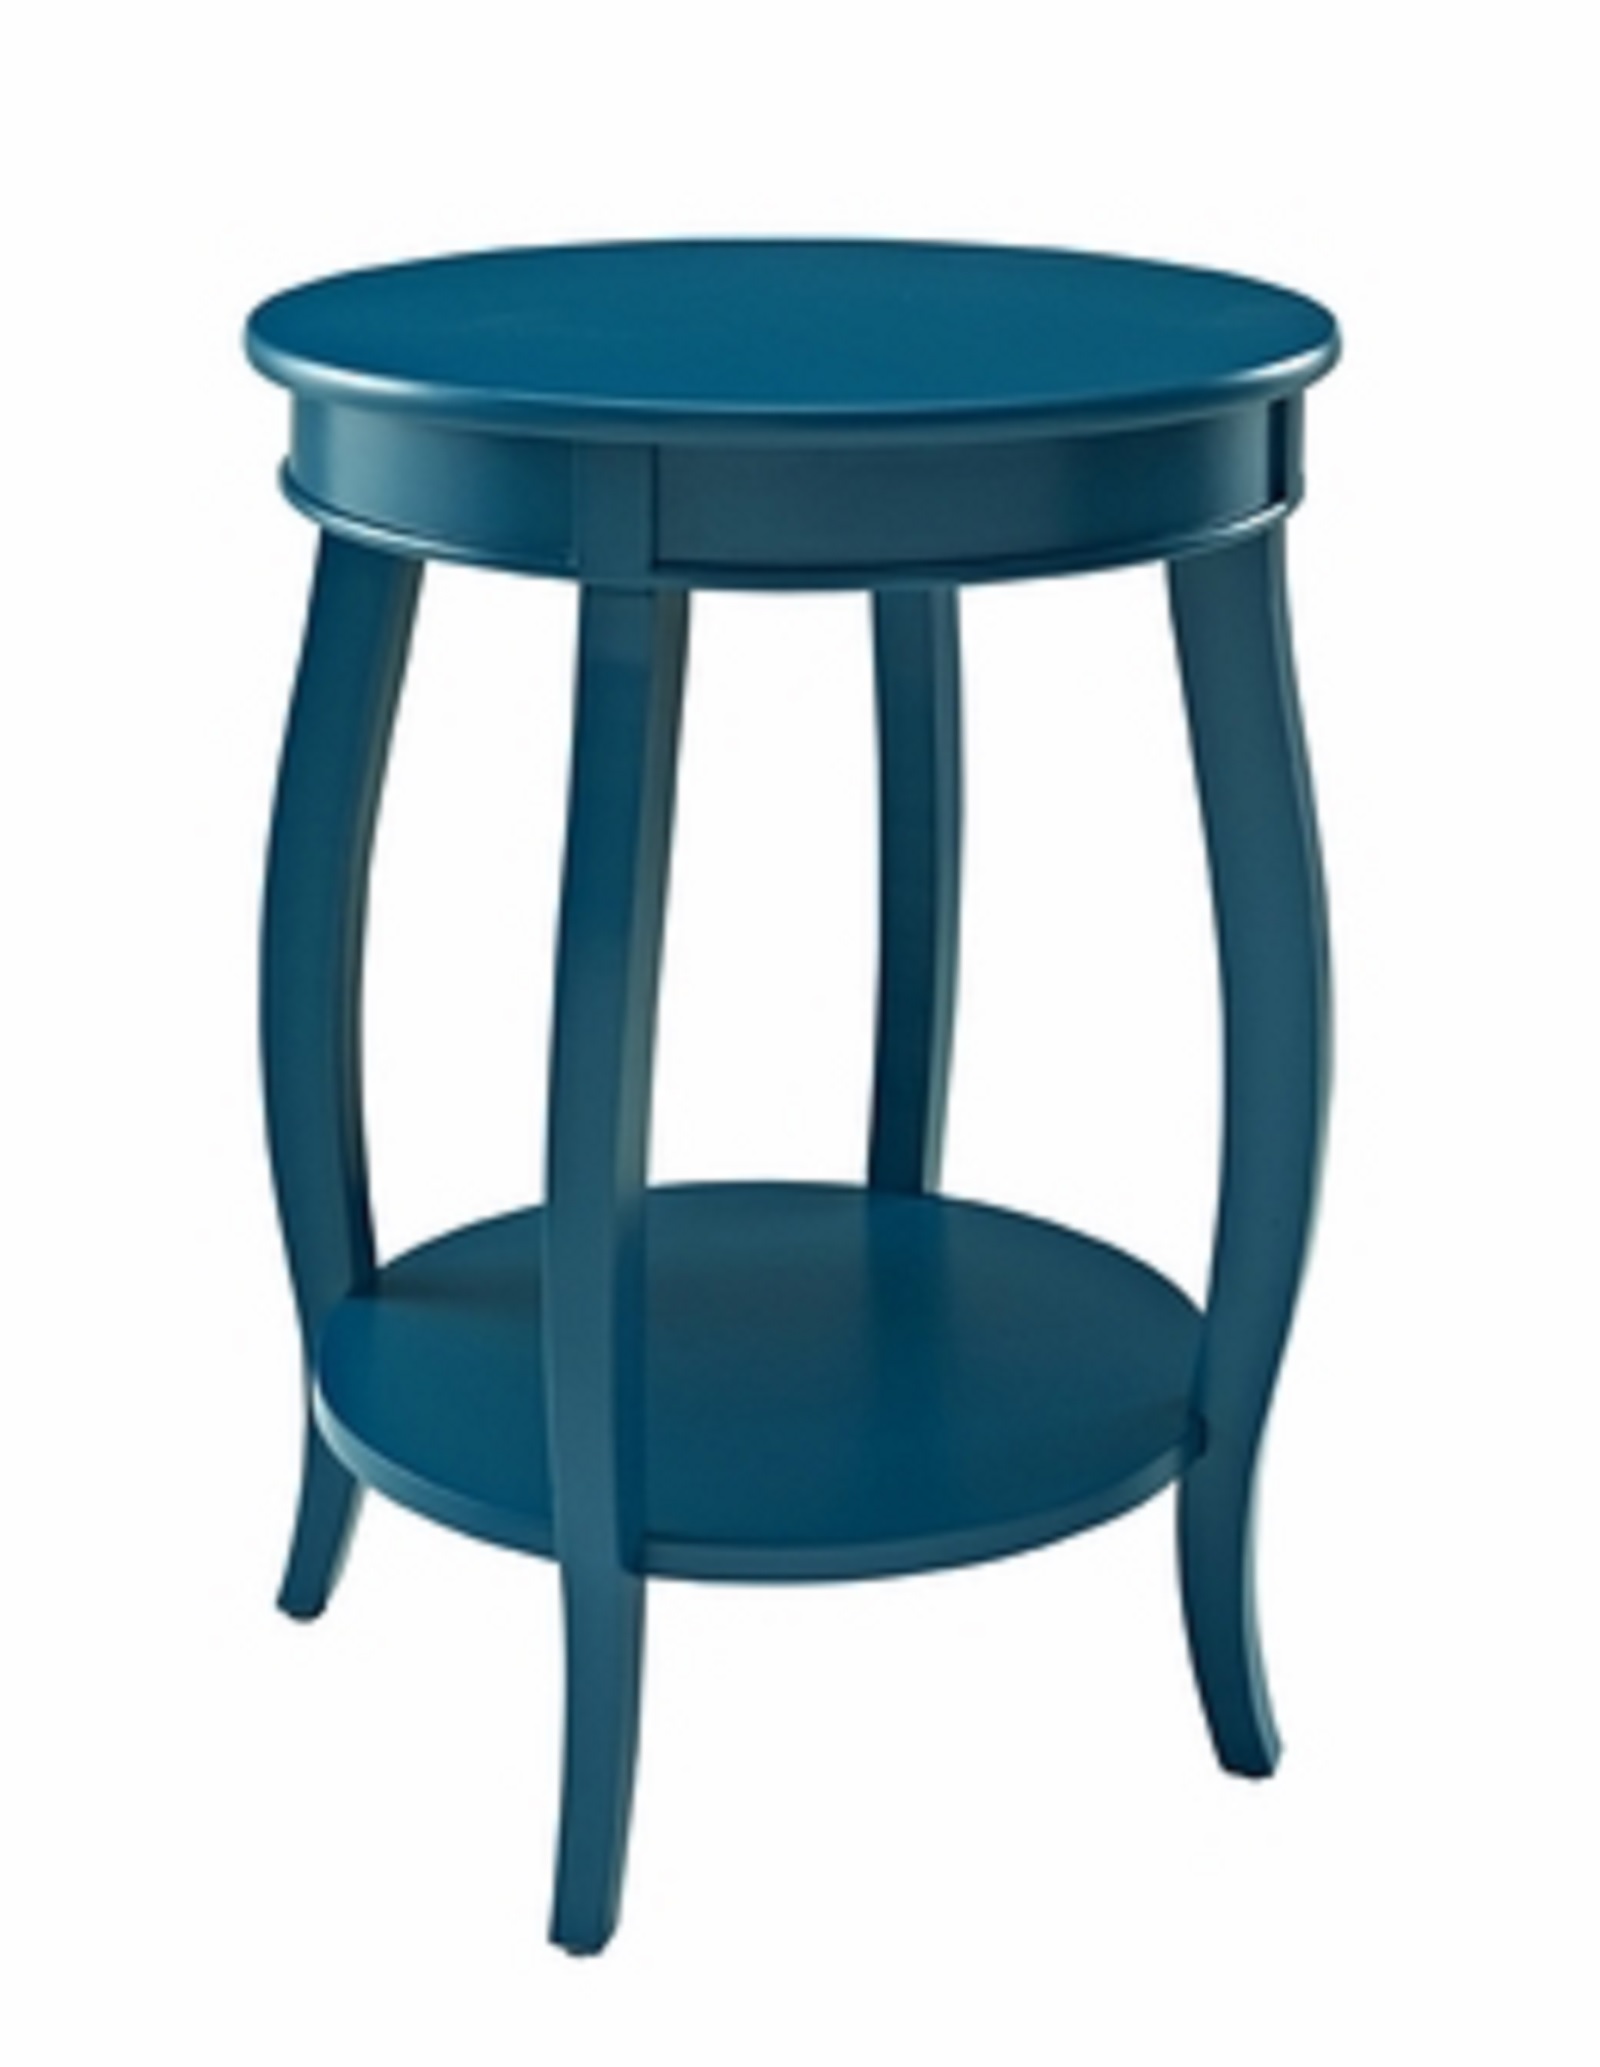 L Powell Teal Round Table with Shelf